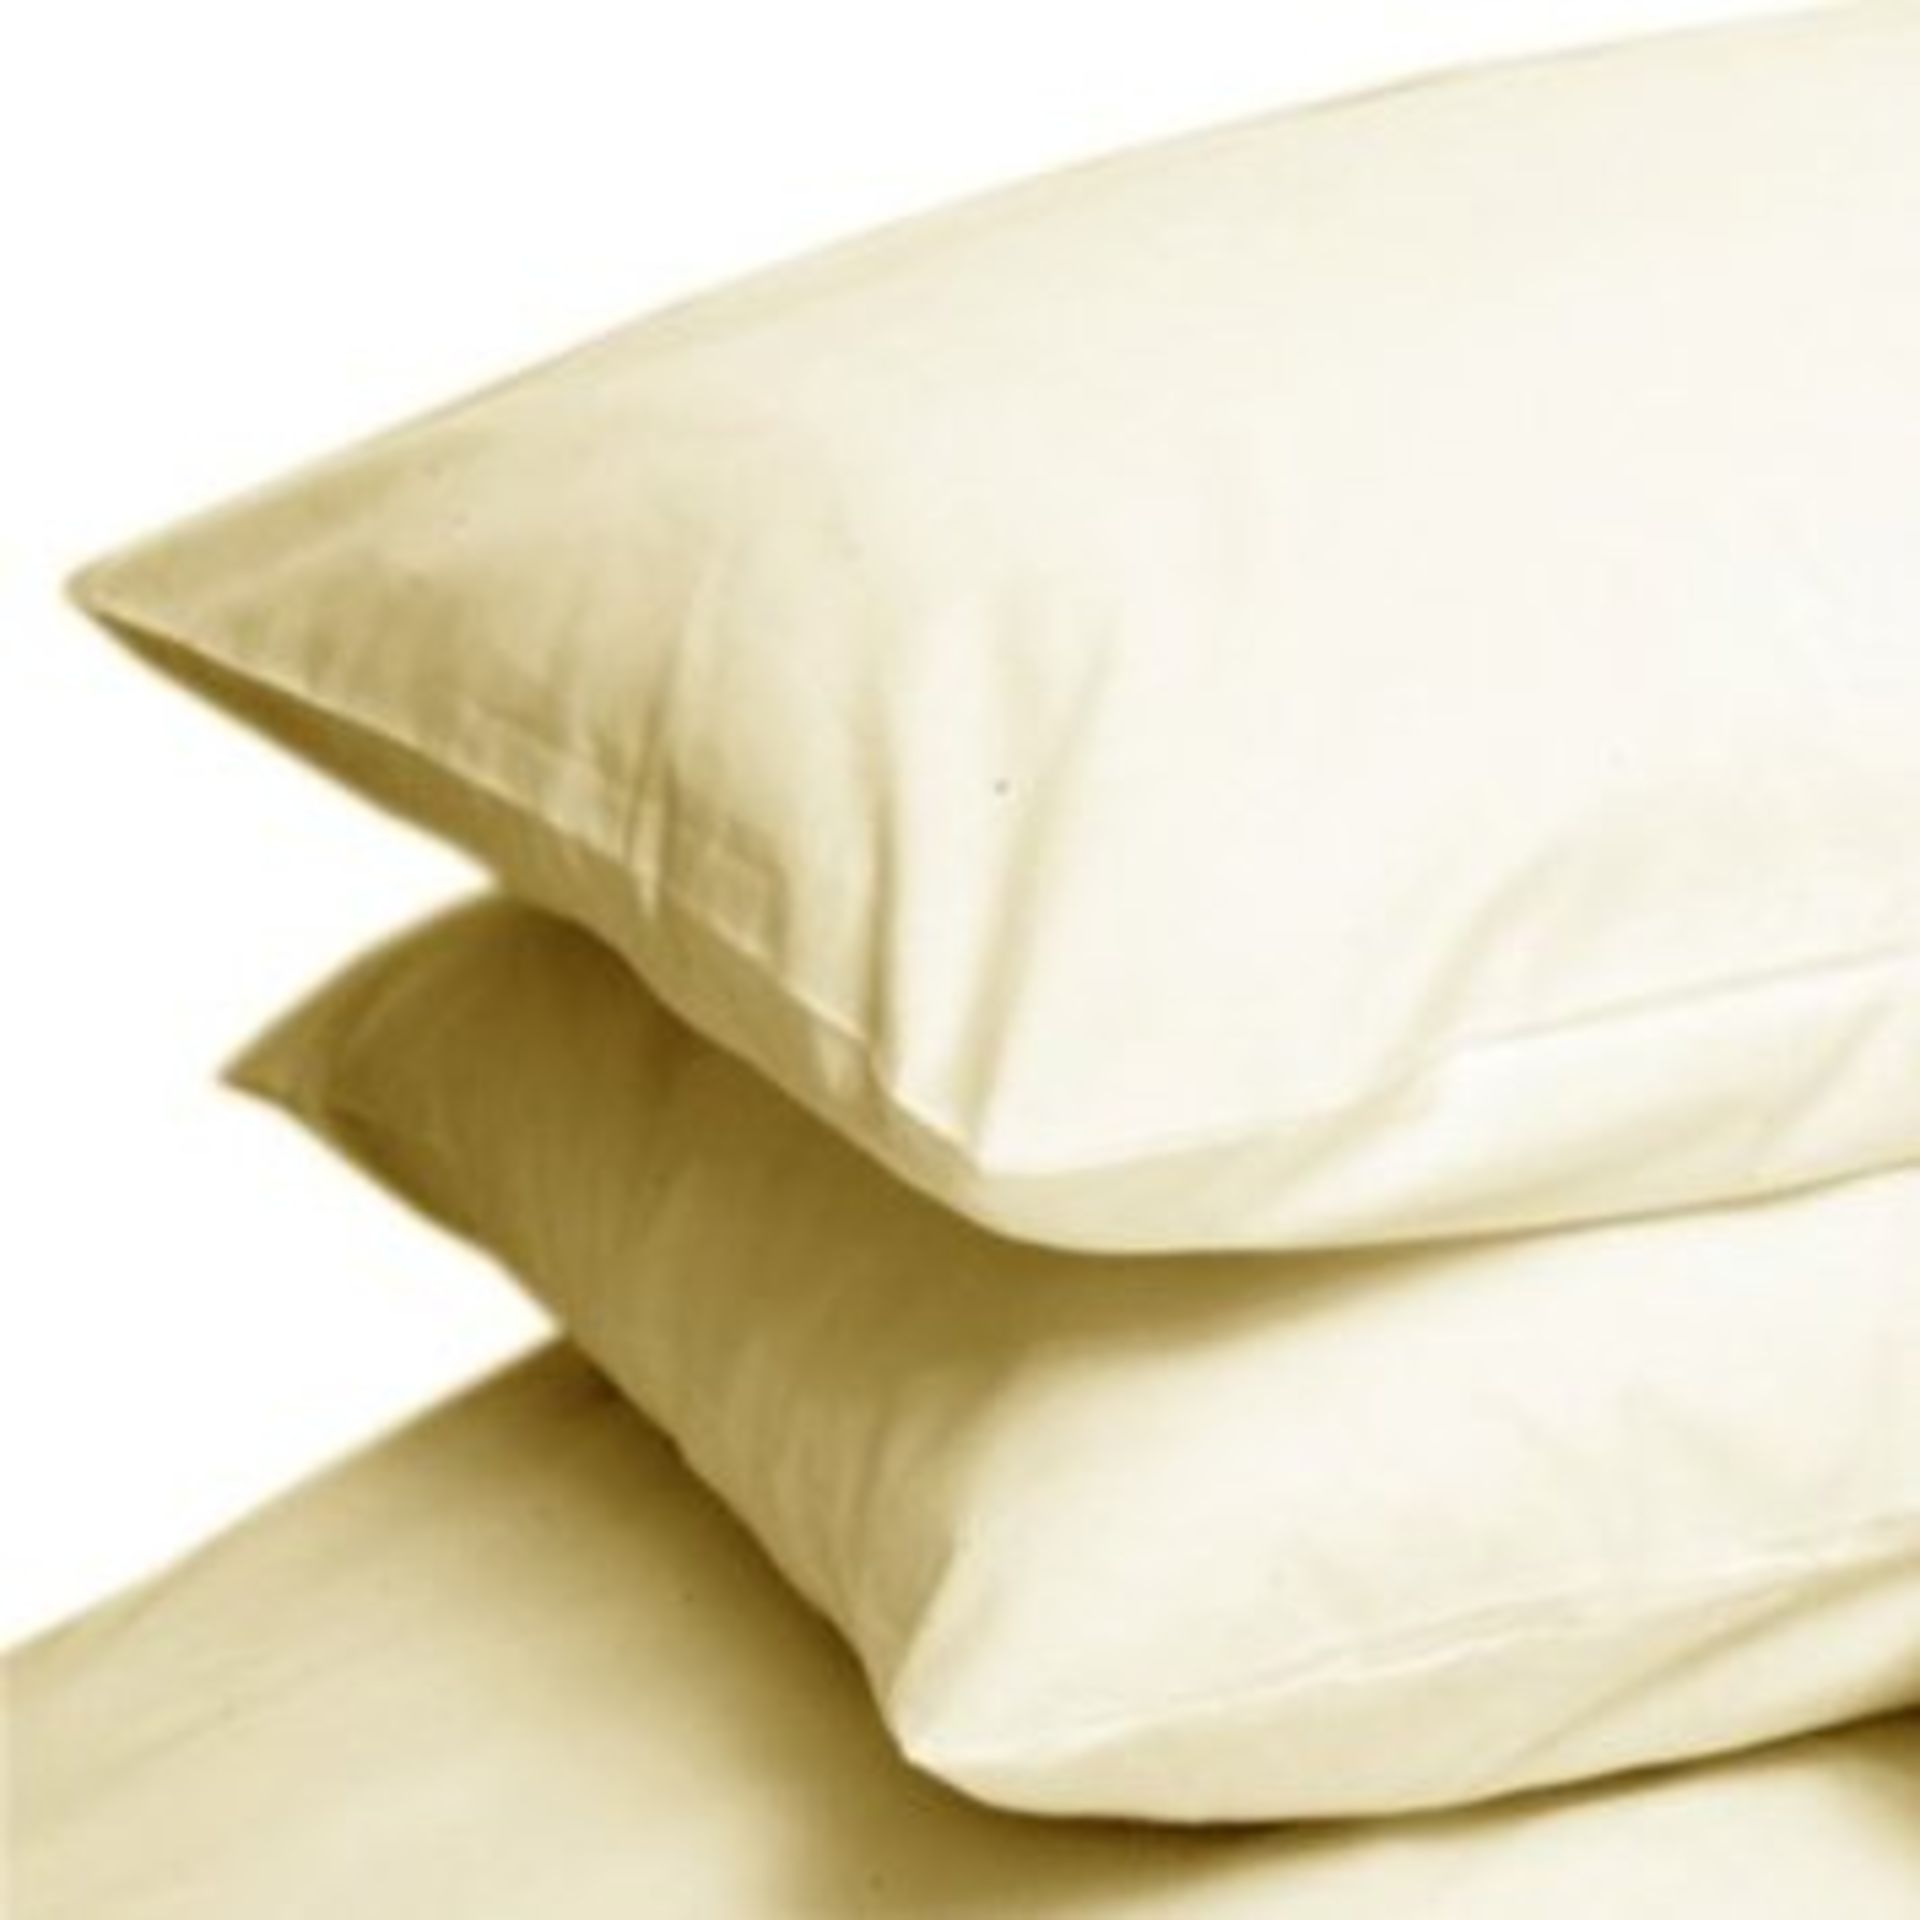 V Brand New Sleep & Dream Pair Of Luxury Percale Plain Dyed Pillowcases 20"x30" Approx X 2 YOUR